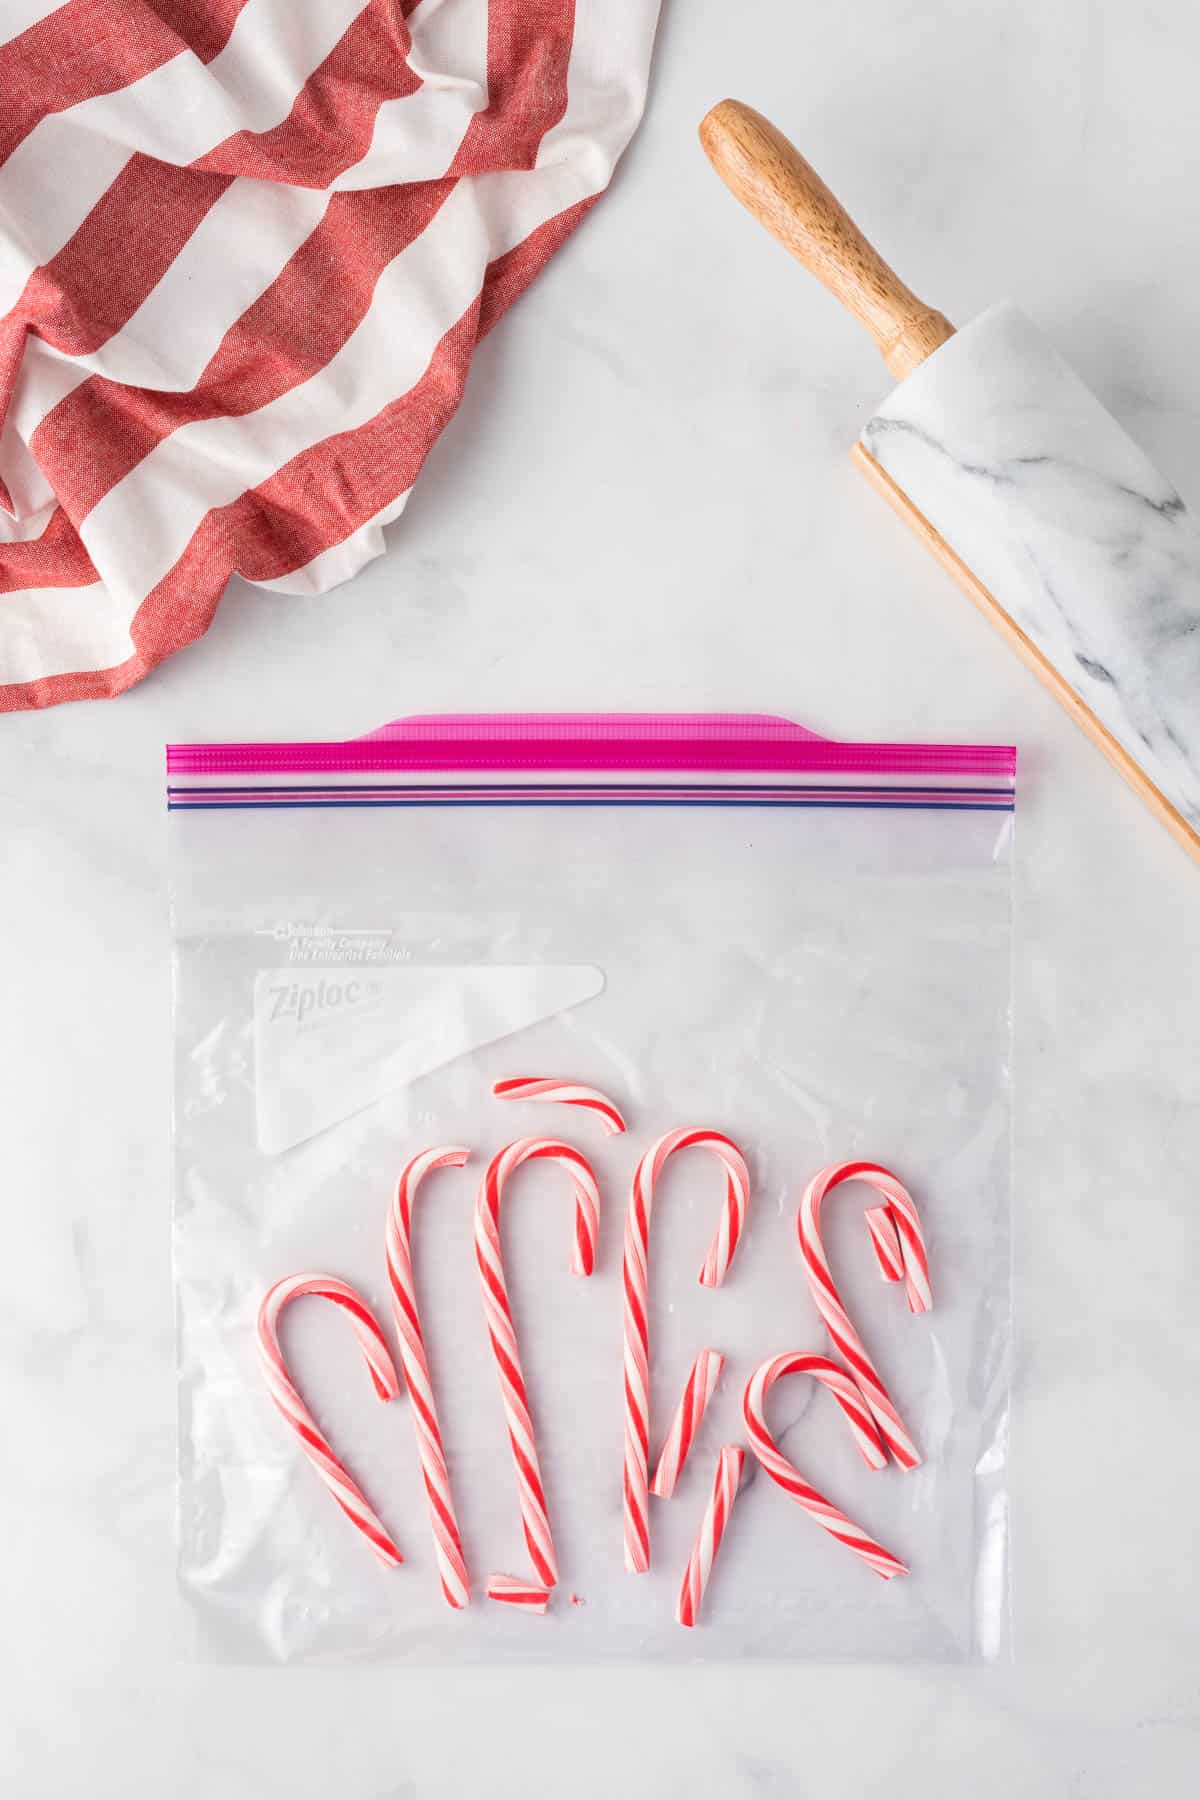 candy canes in a ziploc bag